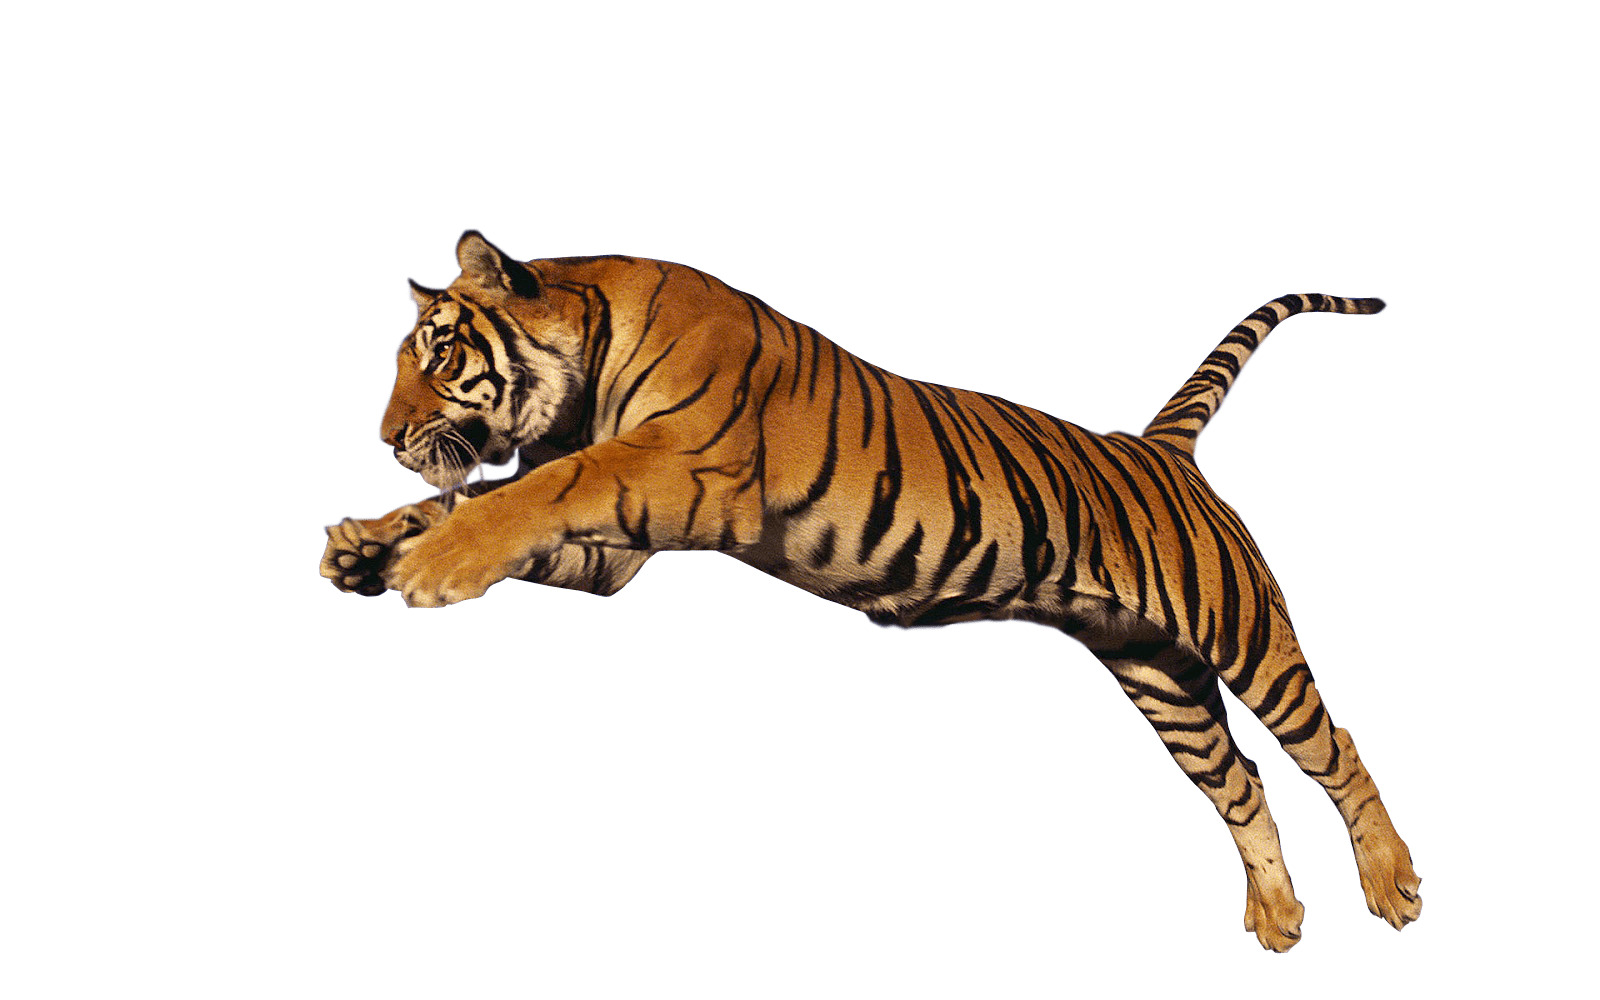 Tiger Jump High png icons